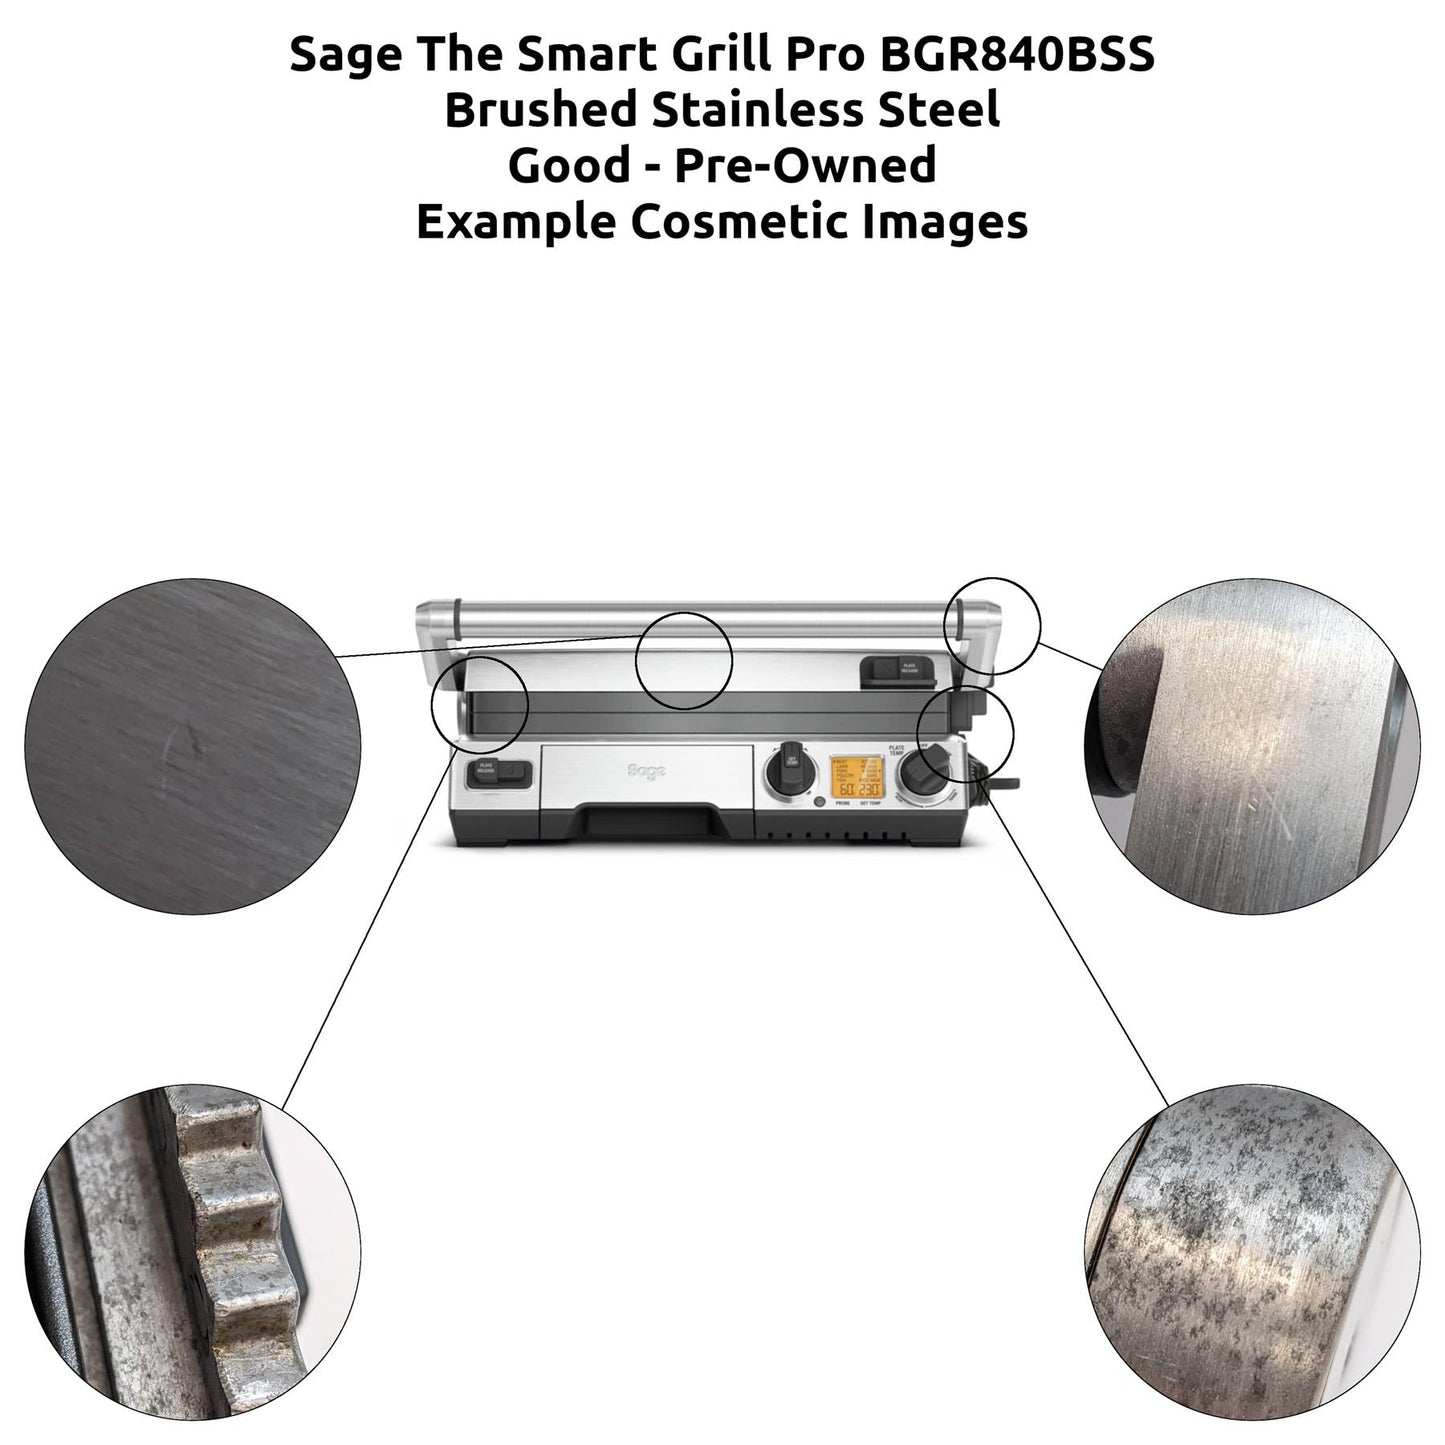 Sage The Smart Grill Pro BGR840 Electric Grill